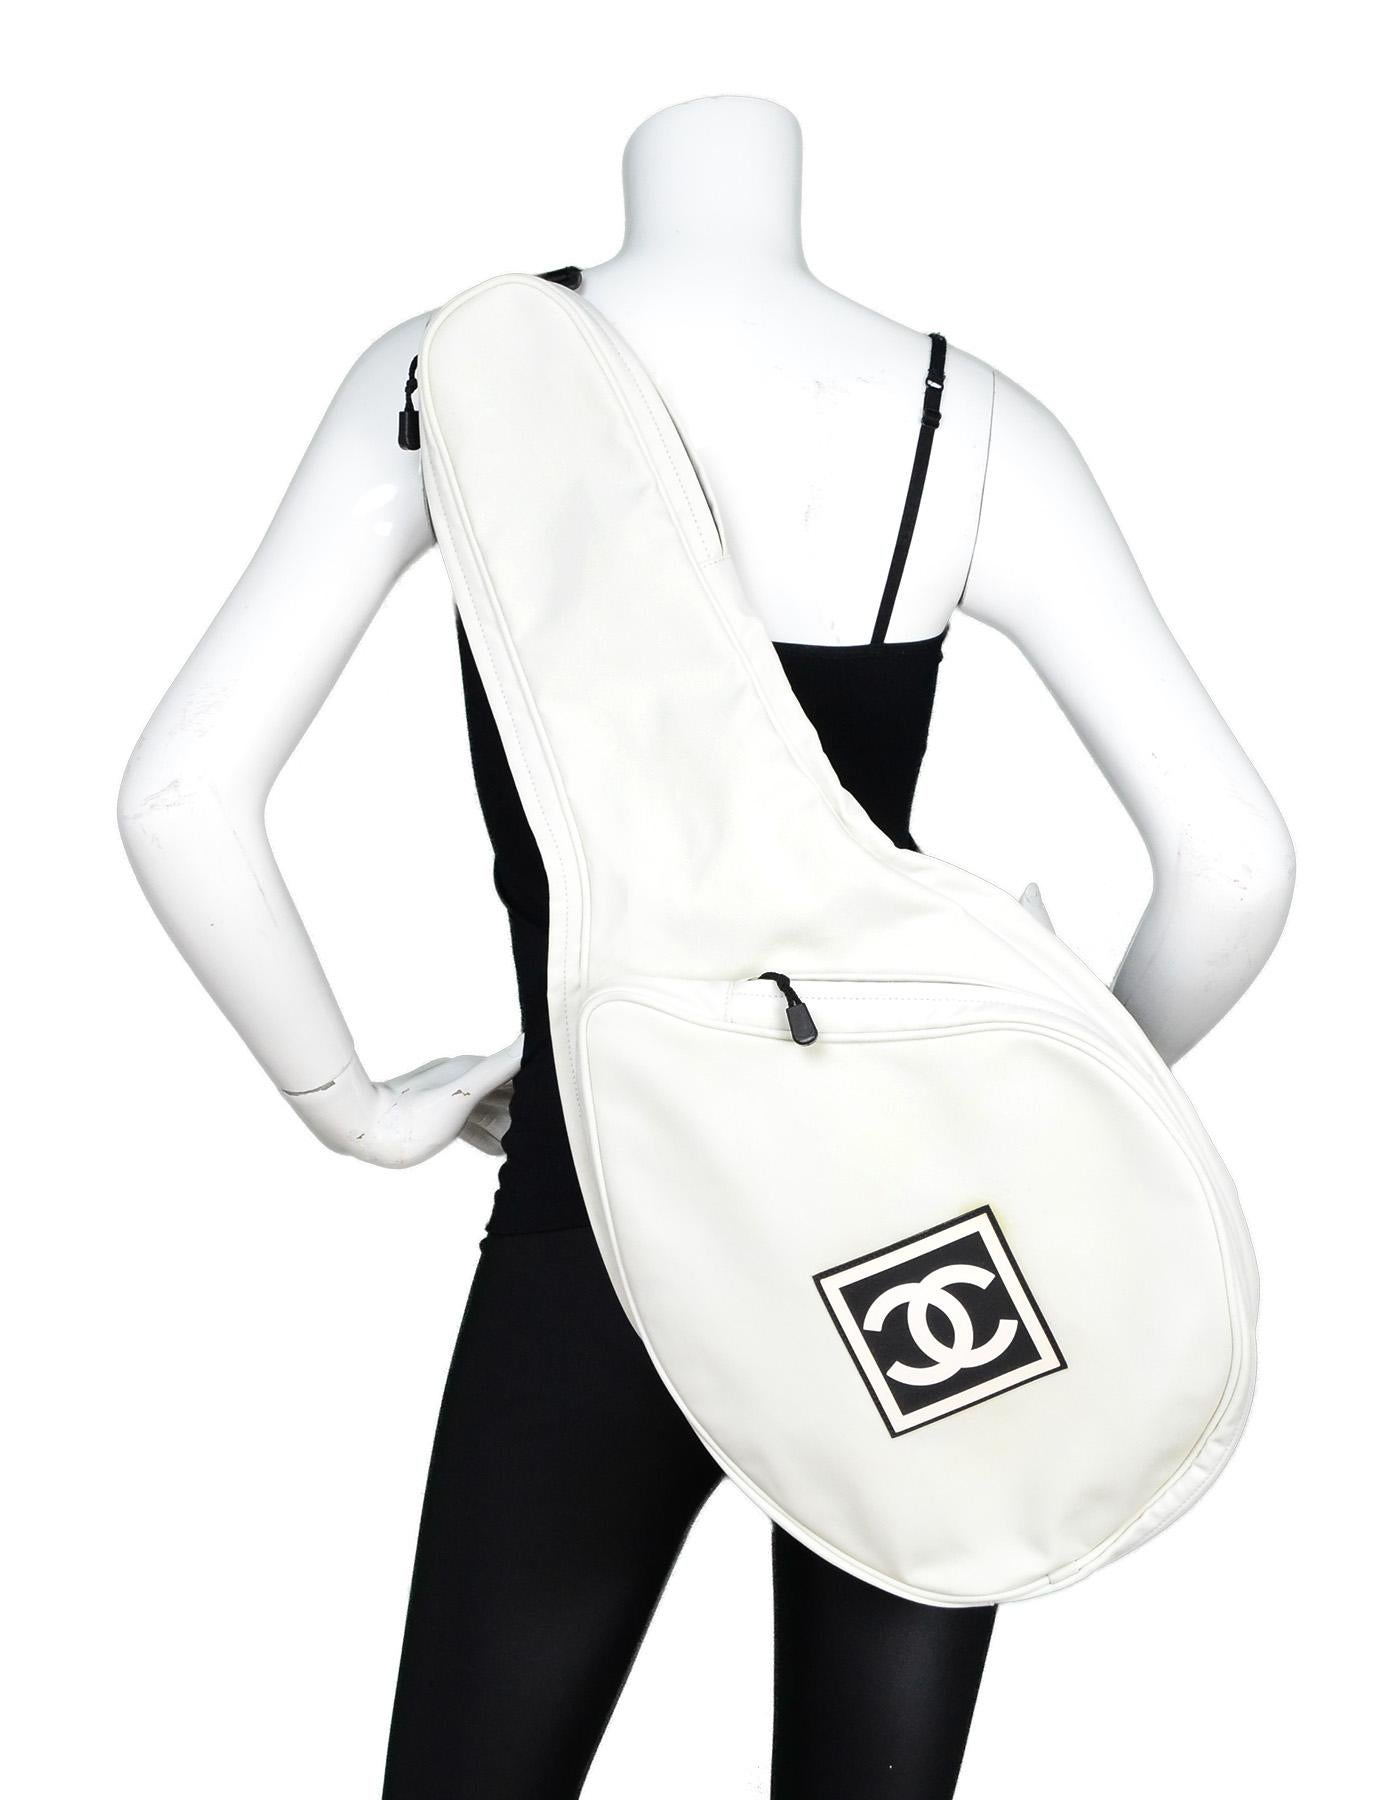 Chanel Off White Canvas Tennis Racquet Cover Bag W/ Rubber CC Logo On Front

Made In: Italy
Year of Production: 2003-2004
Color: Off-white and black
Hardware: Black
Materials: Canvas and nylon
Lining: Black nylon
Closure/Opening: Two zippers